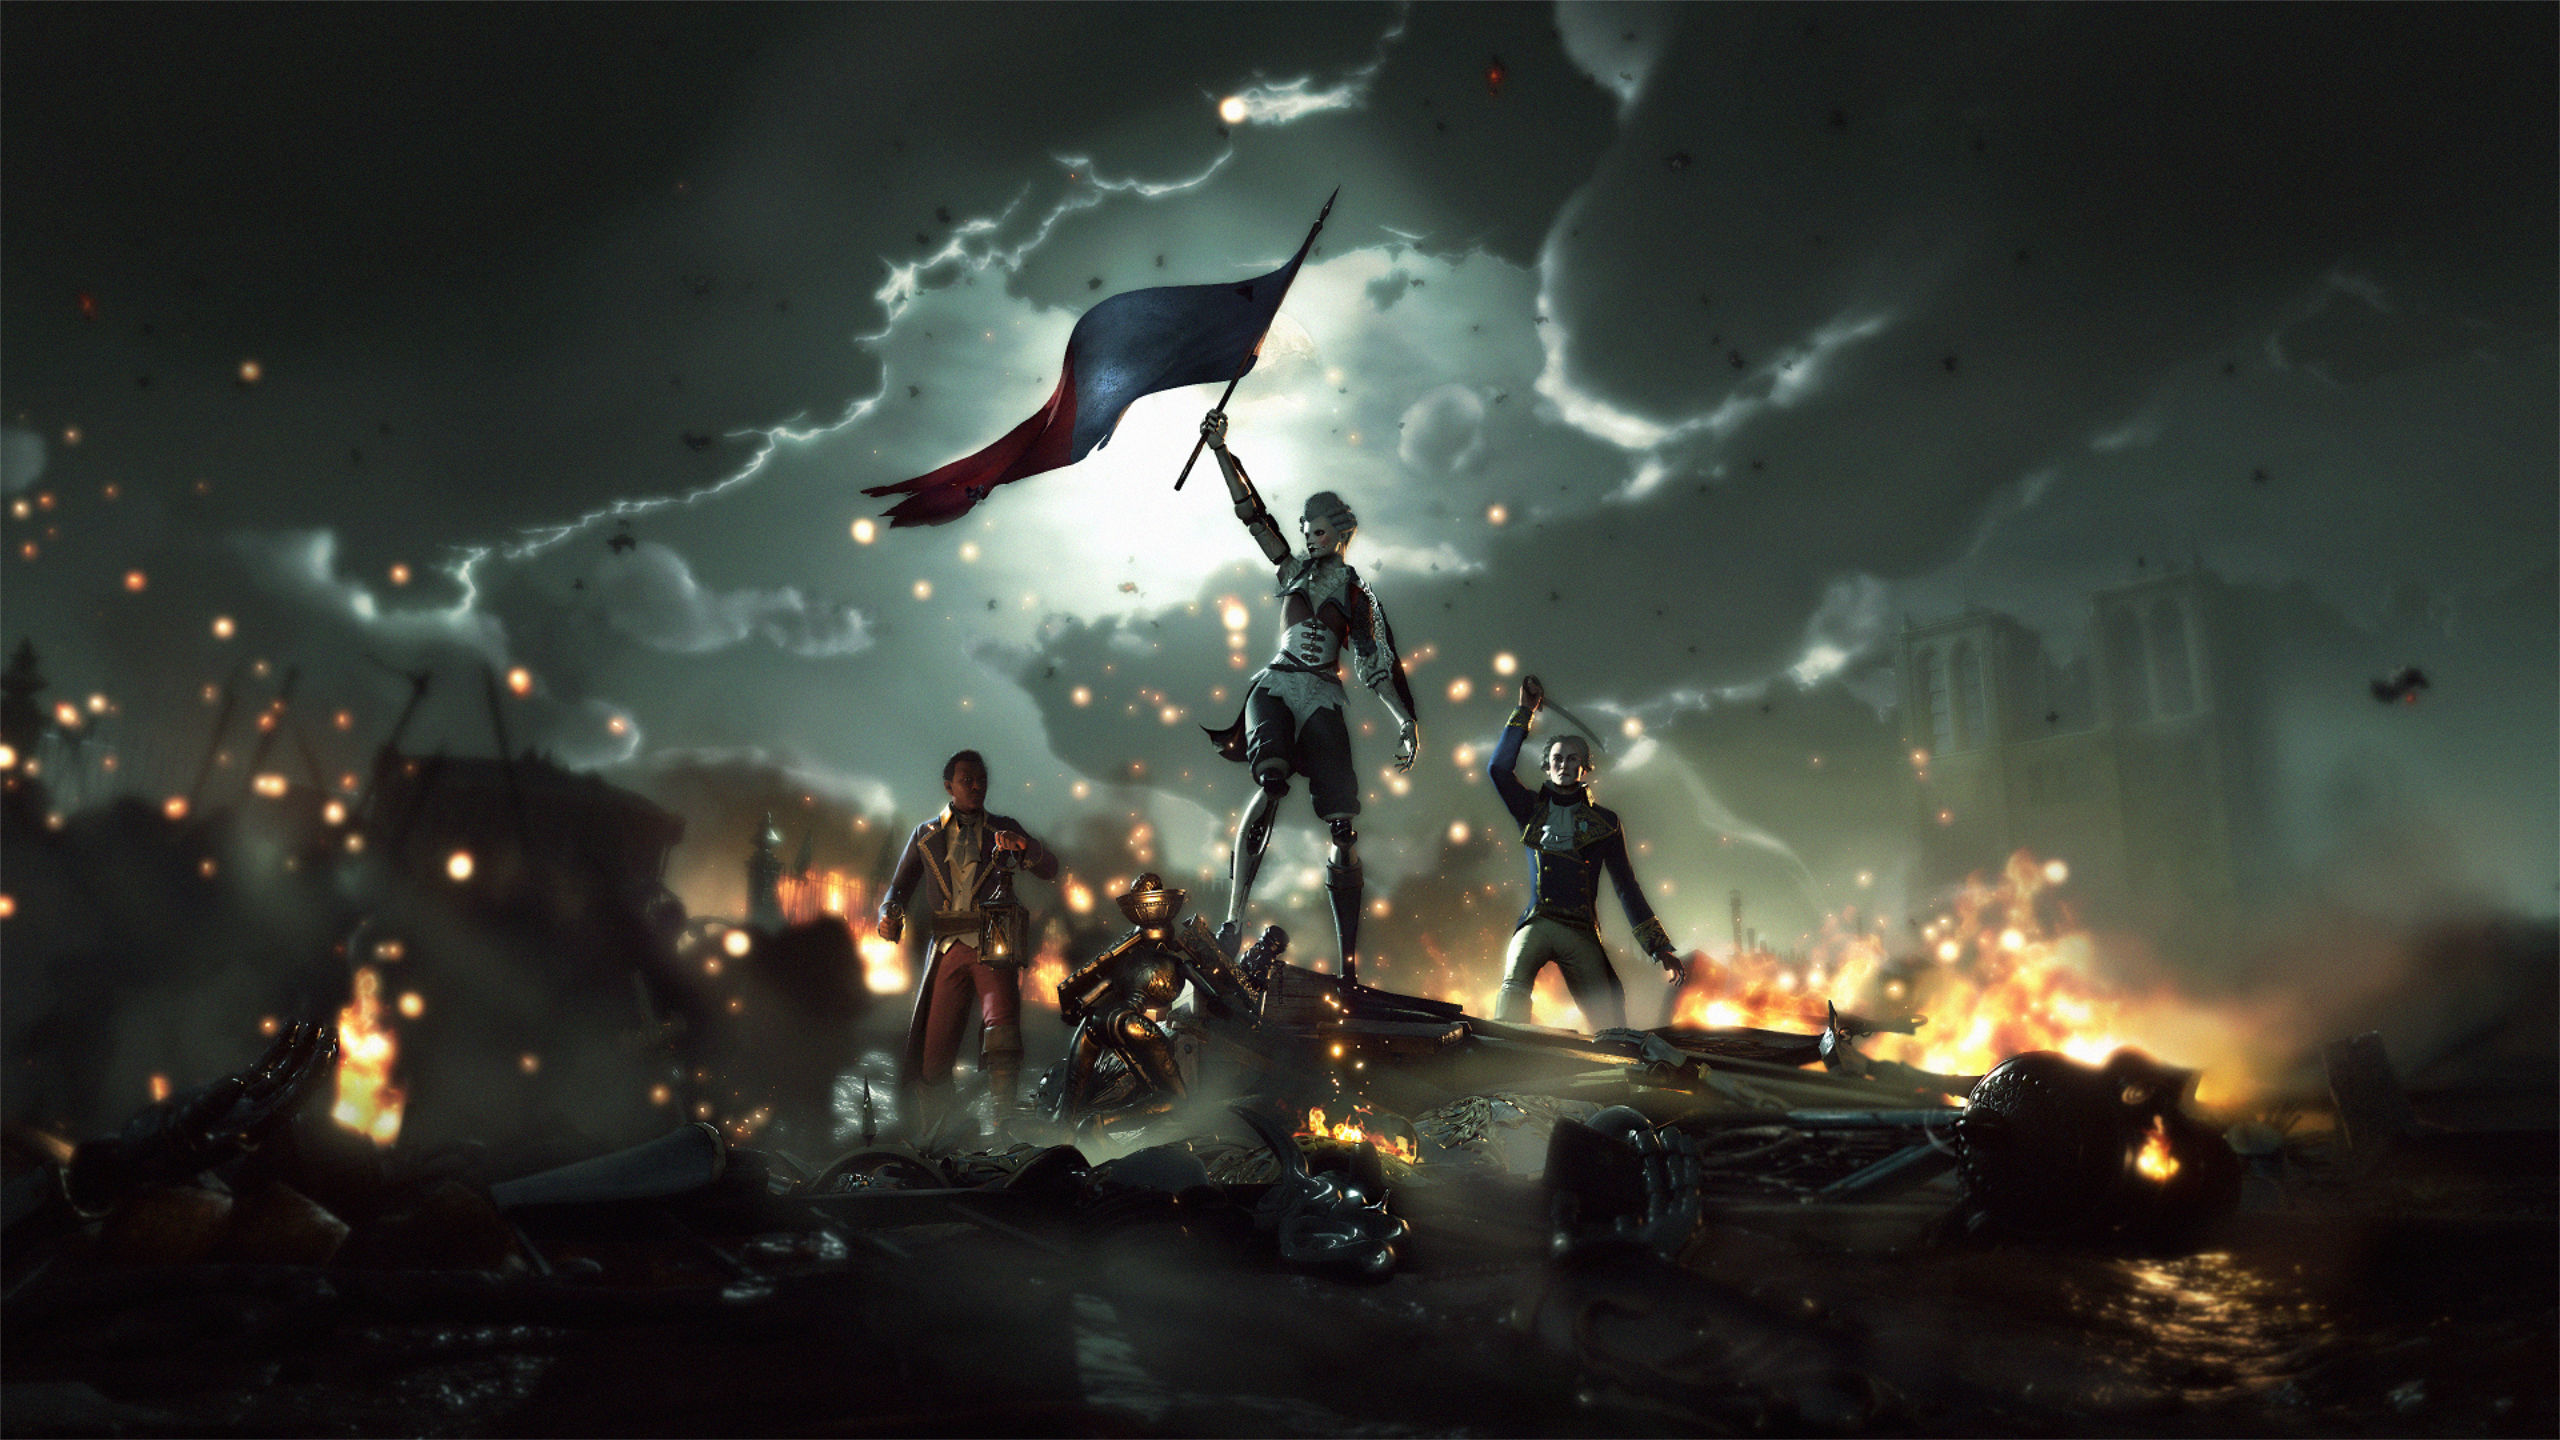 Robots attack during the French Revolution in Steelrising.